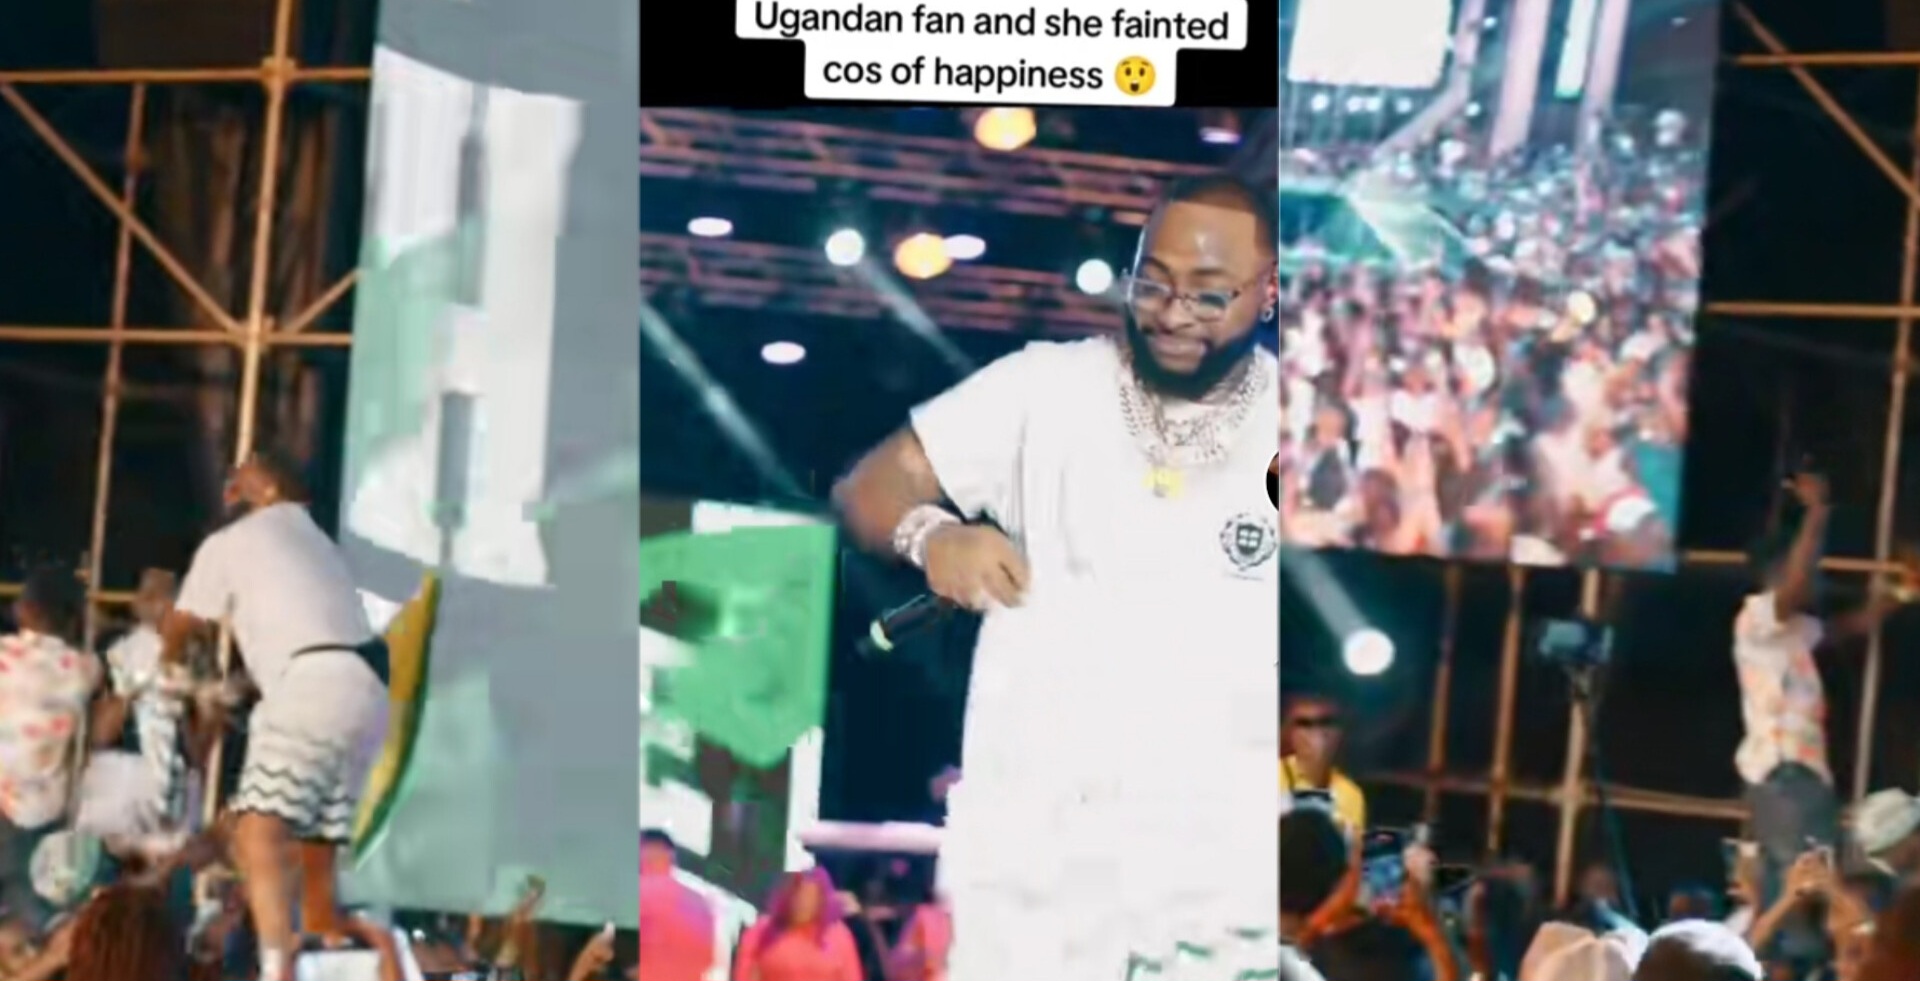 Davido too like girl he never give boy something once for show.”- Female Fan Collapses as Davido Gifts Her His Shirt at Sold-Out Concert in Uganda